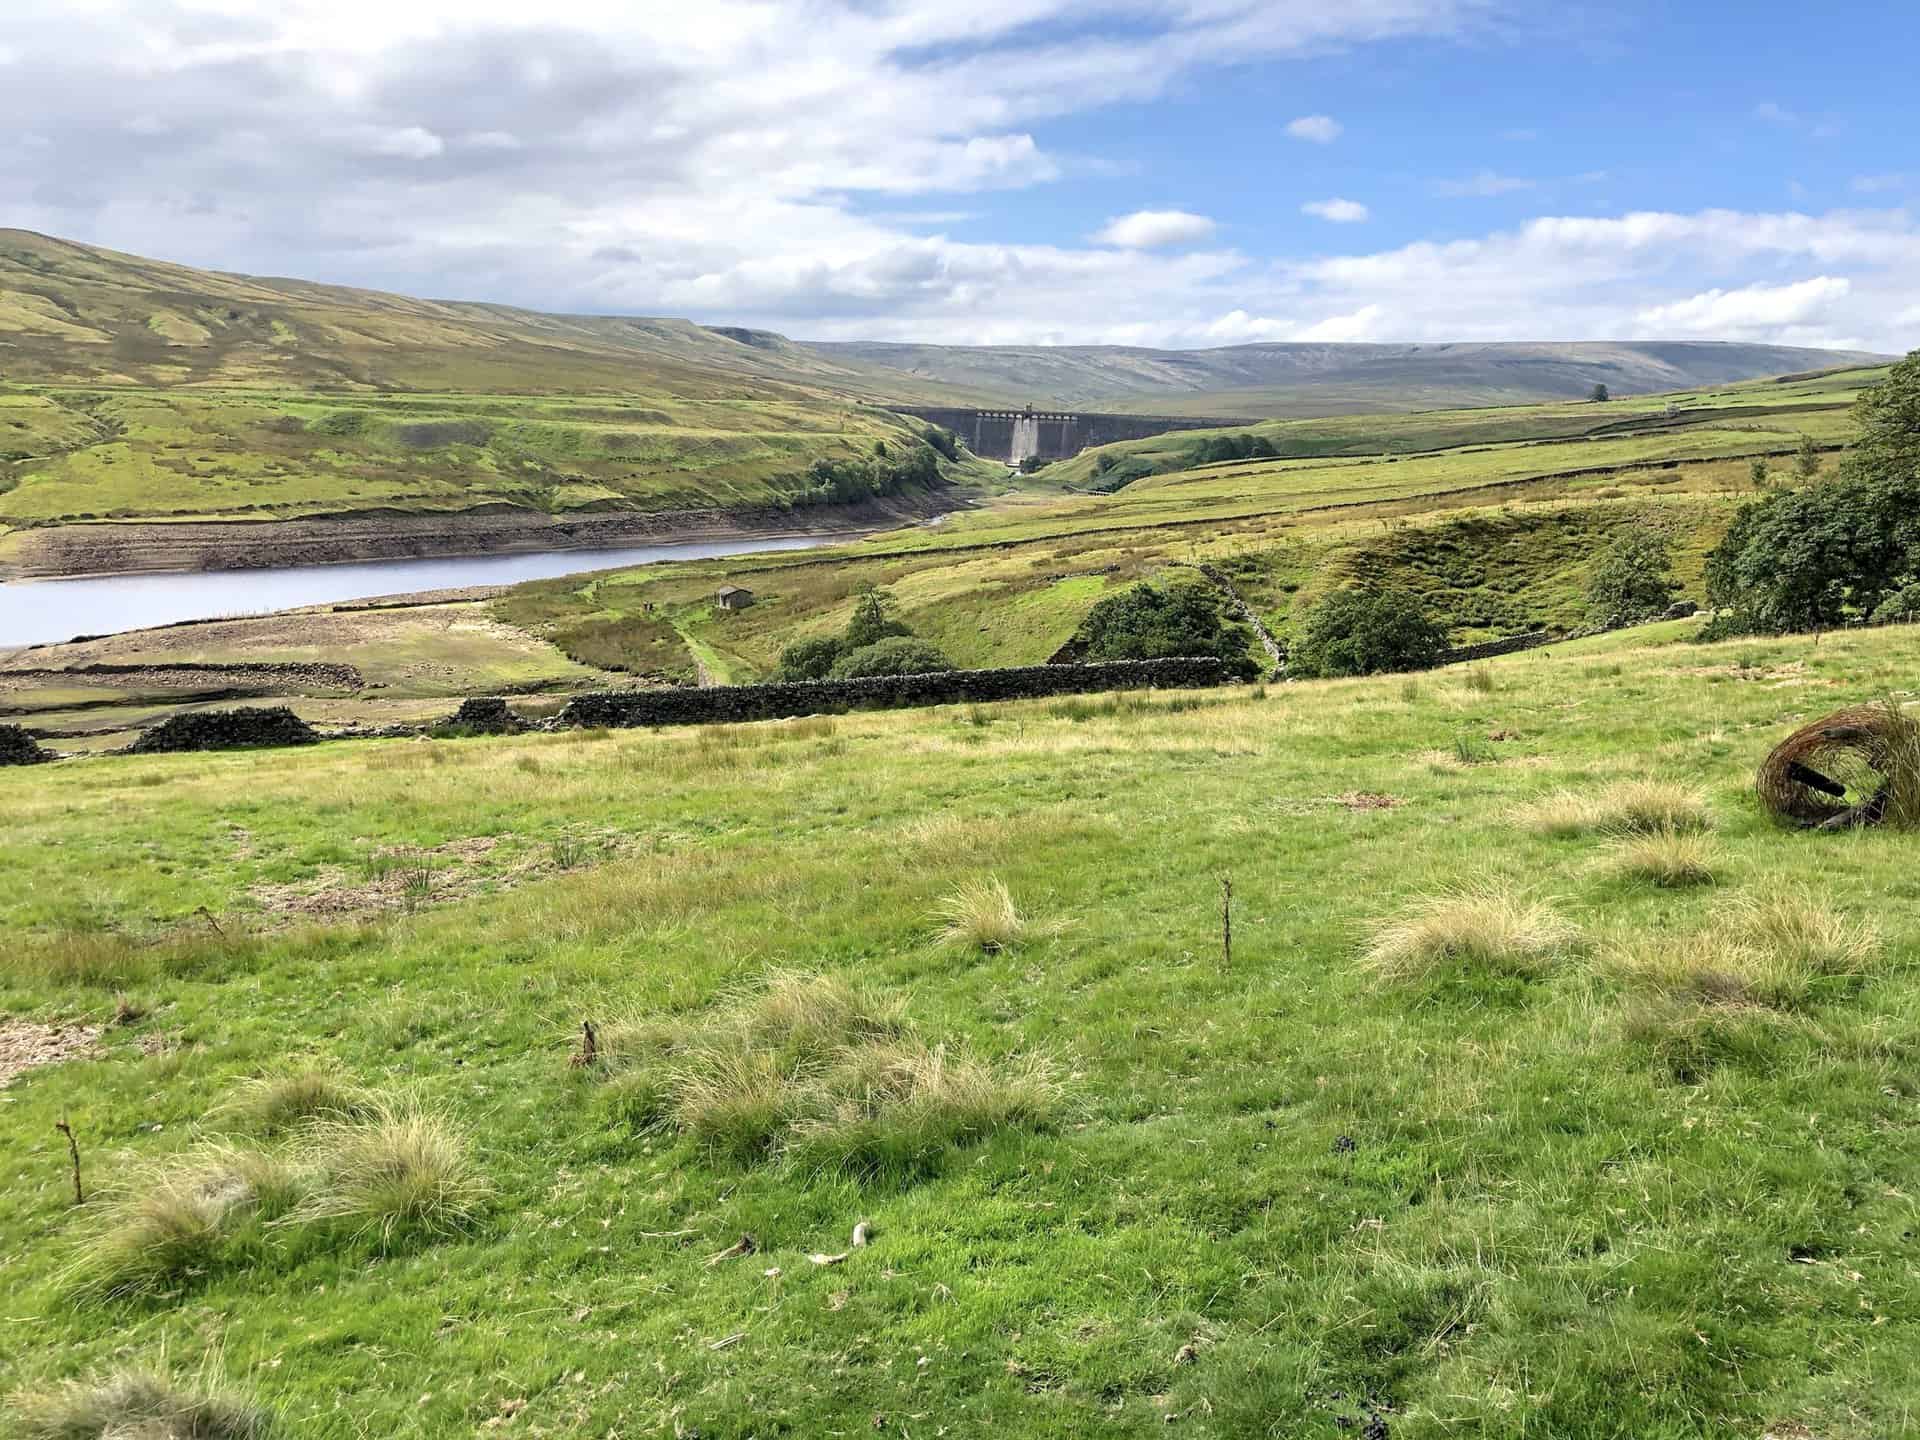 The view south-west towards the dam of Angram Reservoir.